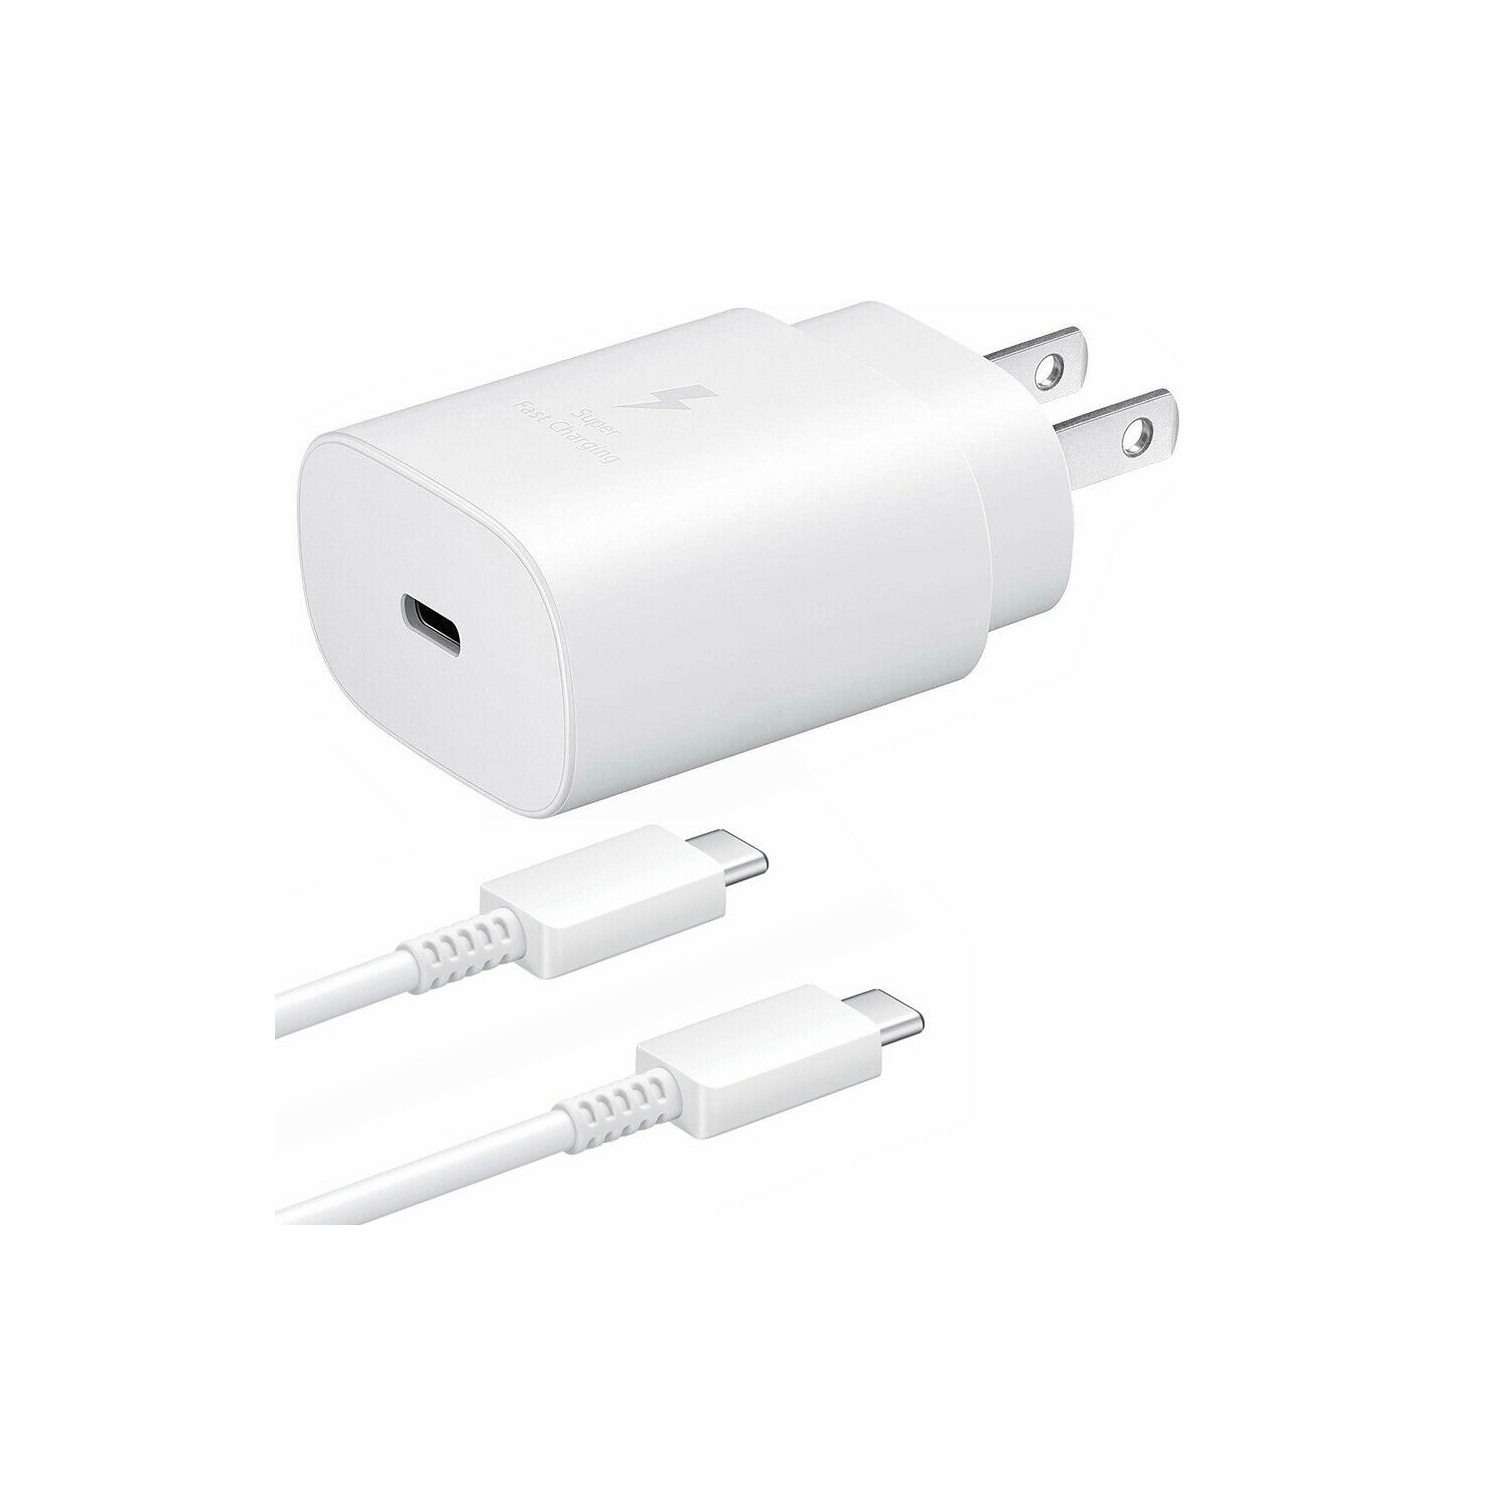 Samsung Super Fast Charging 25W USB Type-C Wall Charger with Type-C Cable